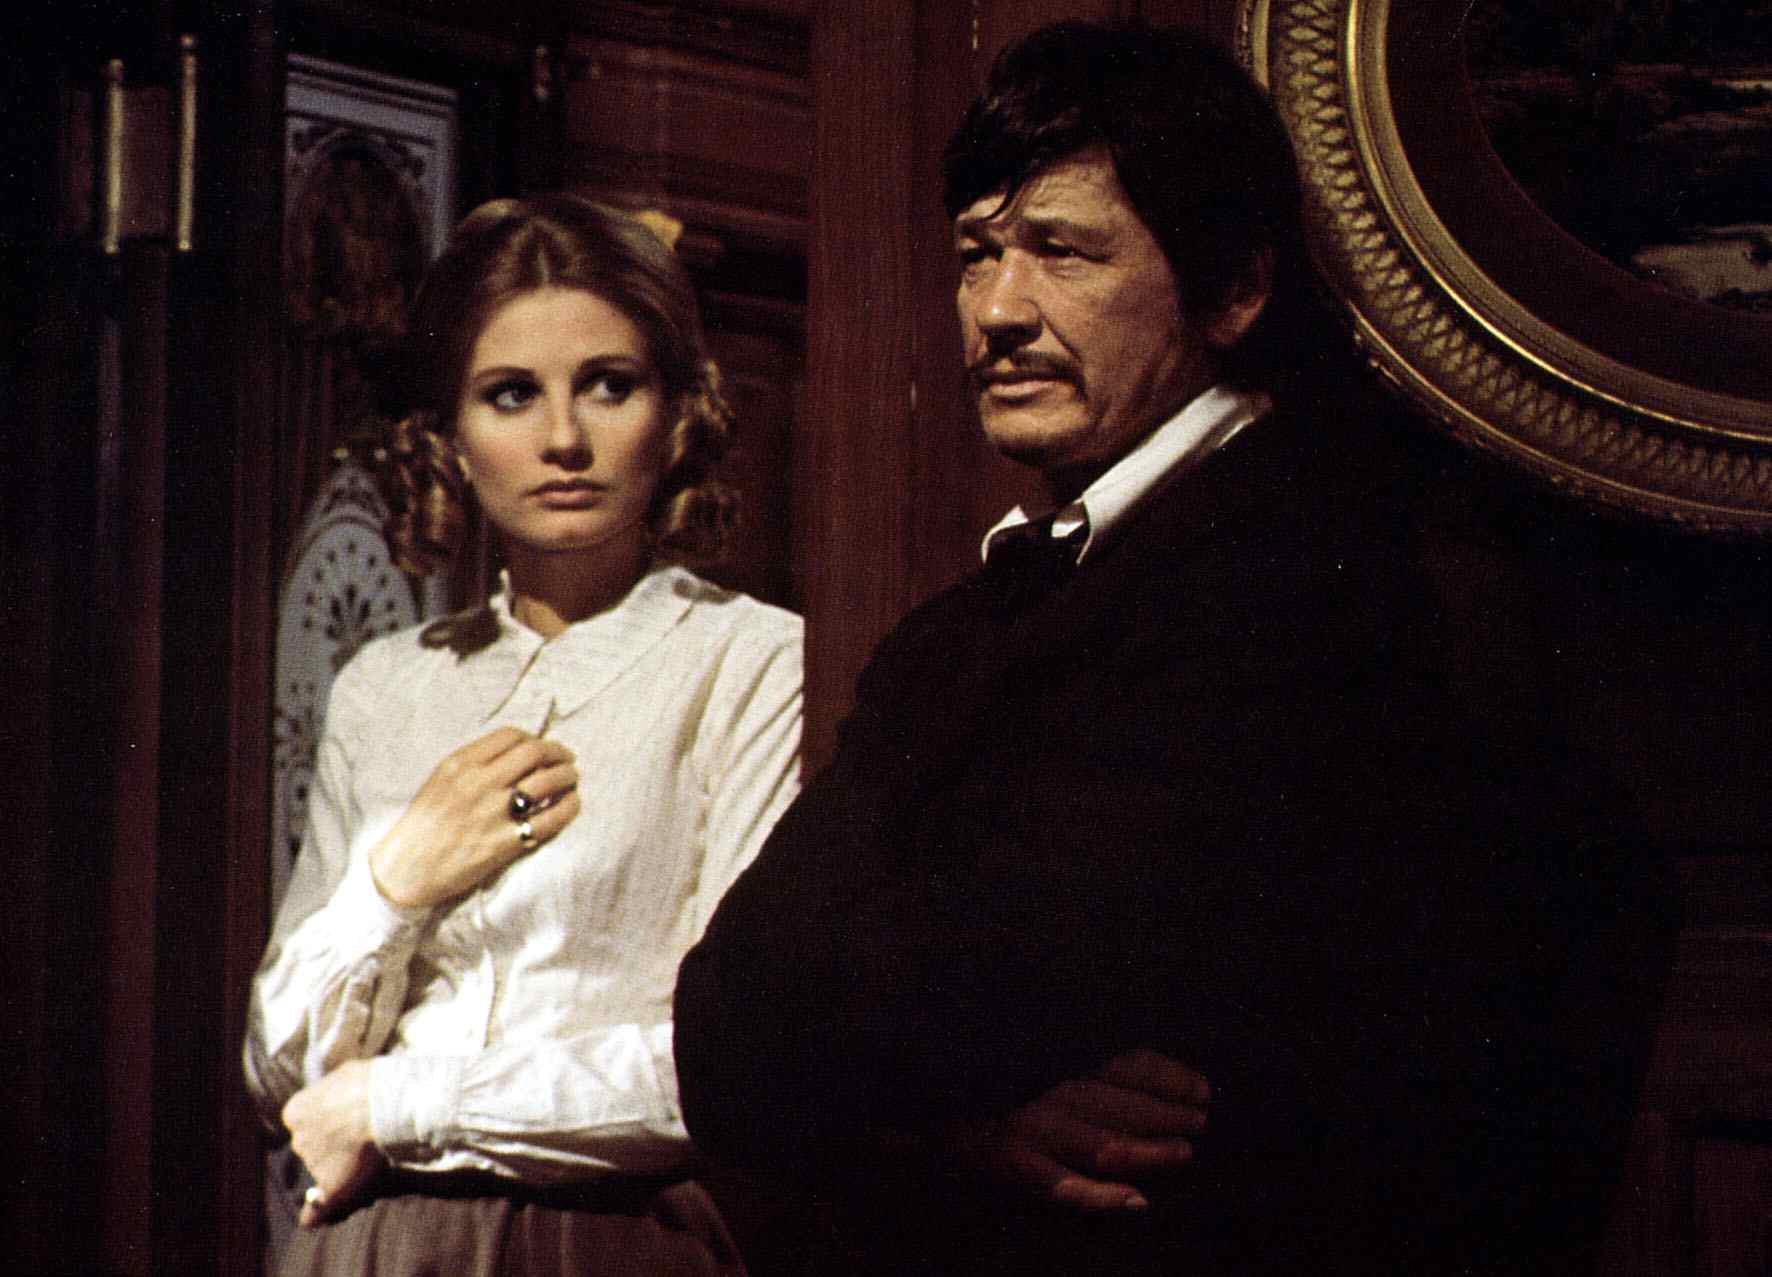 Jill Ireland, and Charles Bronson in Winter, circa 1975 | Source: Getty Images